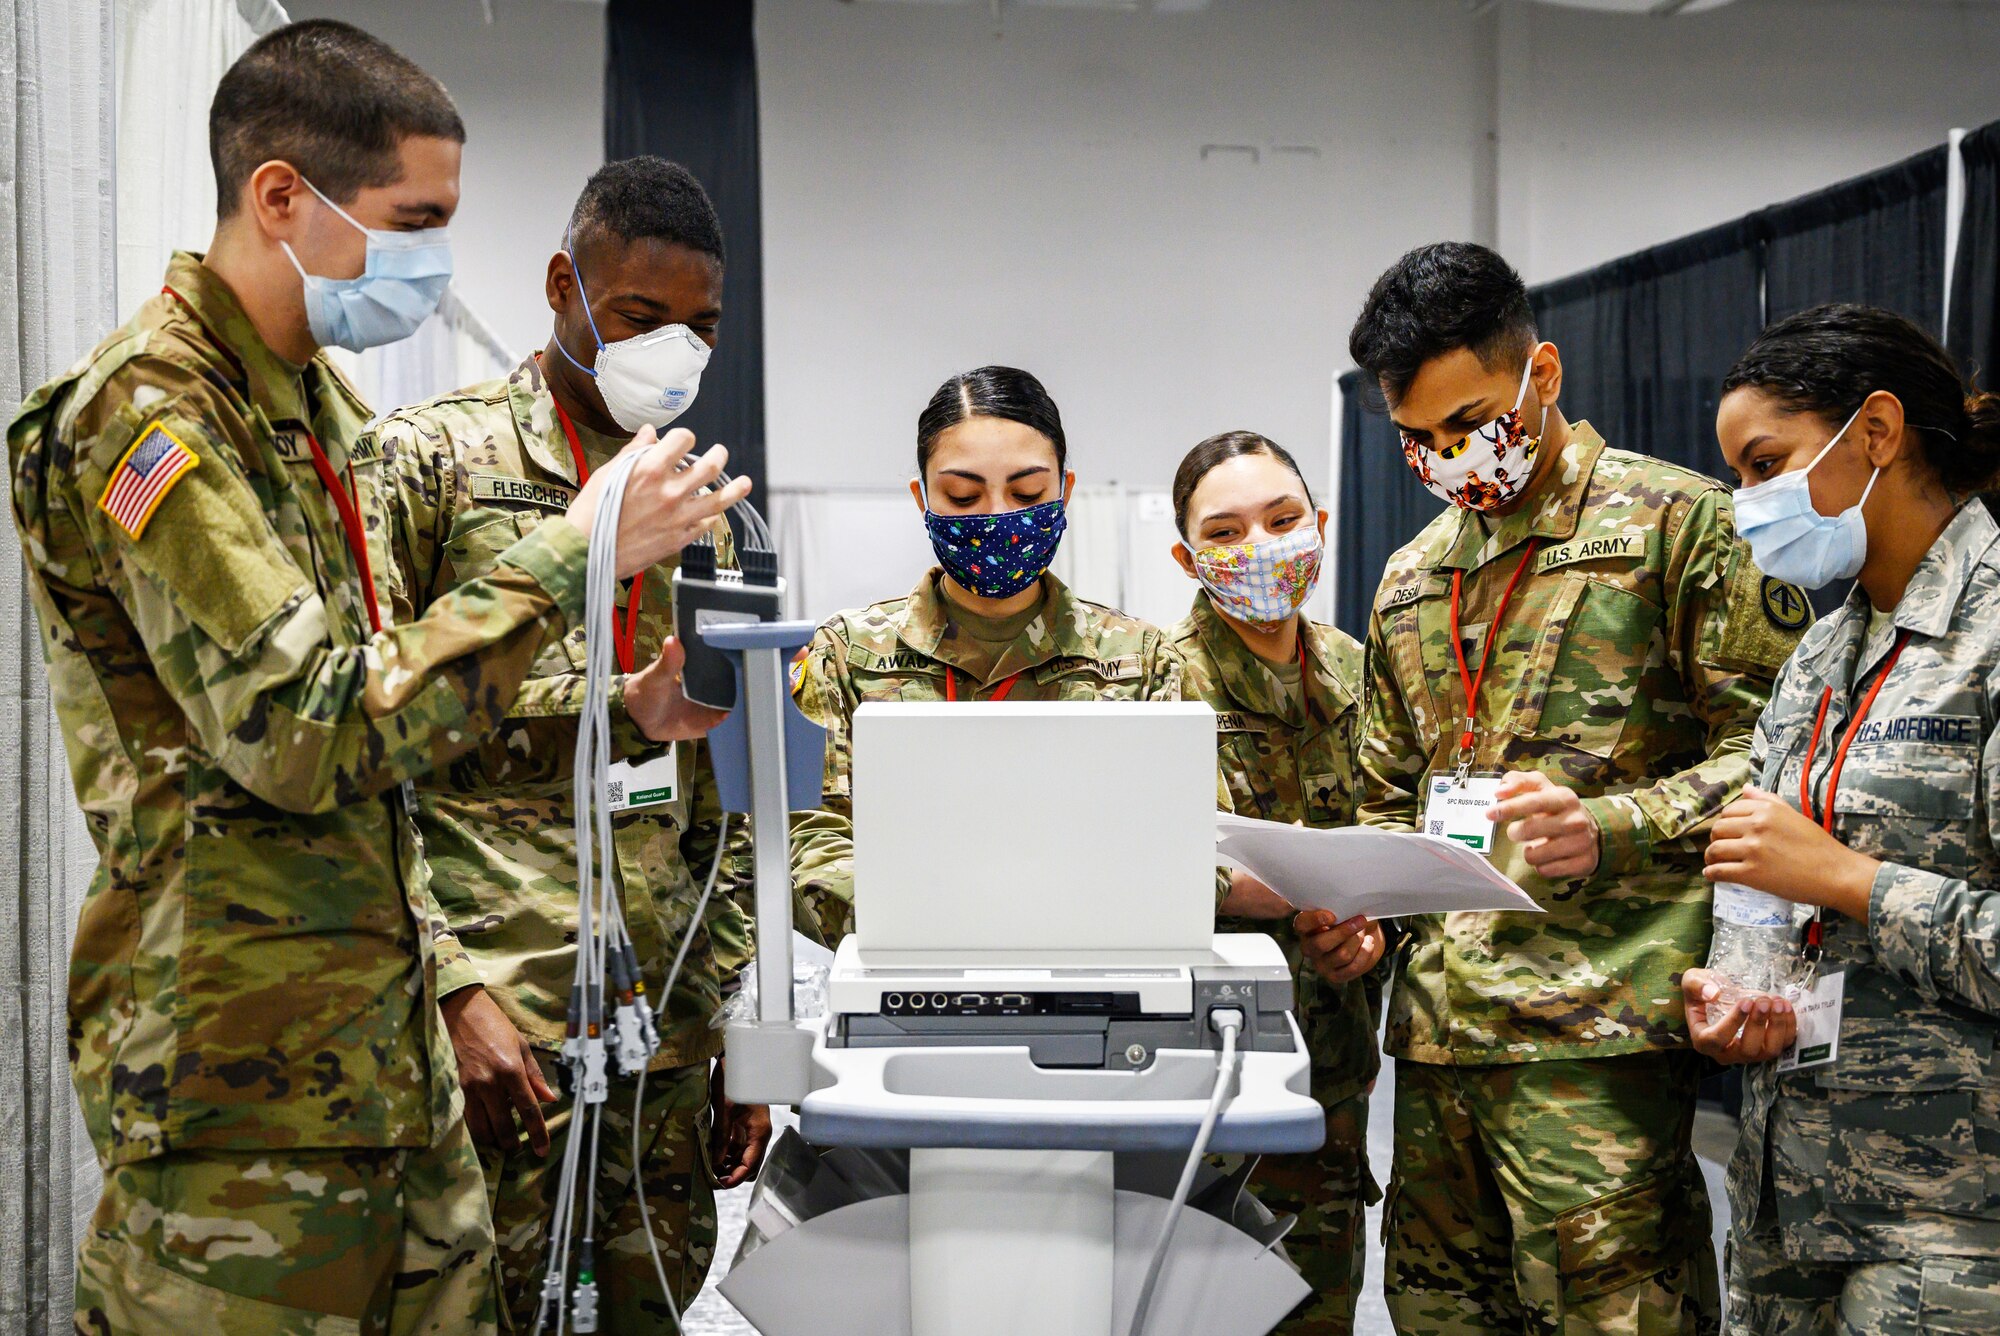 A group of guardsmen test medical equipment at a field medical station.